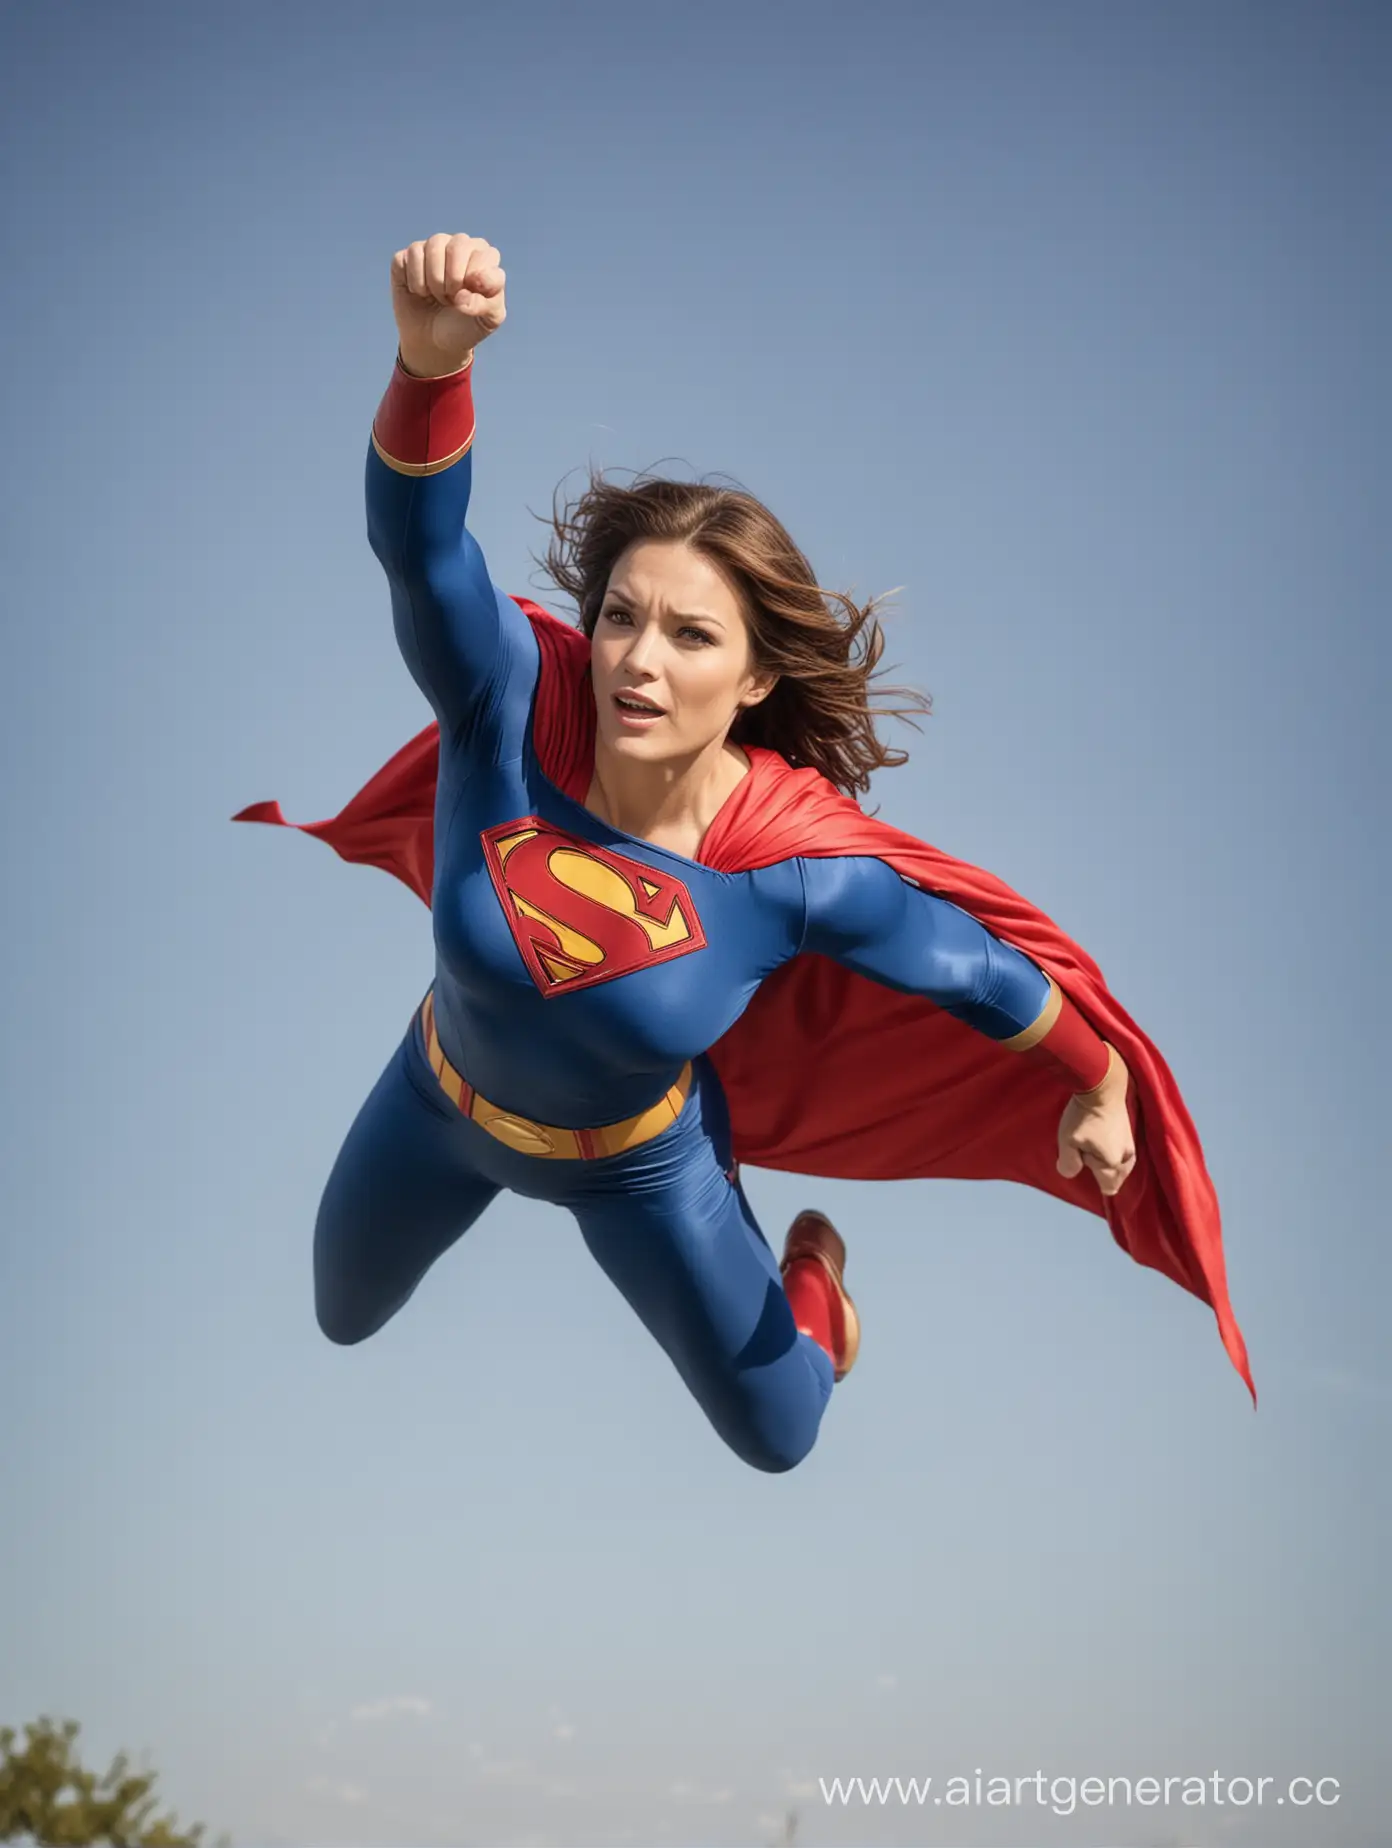 A beautiful woman with brown hair, age 40, She is flying like Superman, she is wearing the classic Superman costume